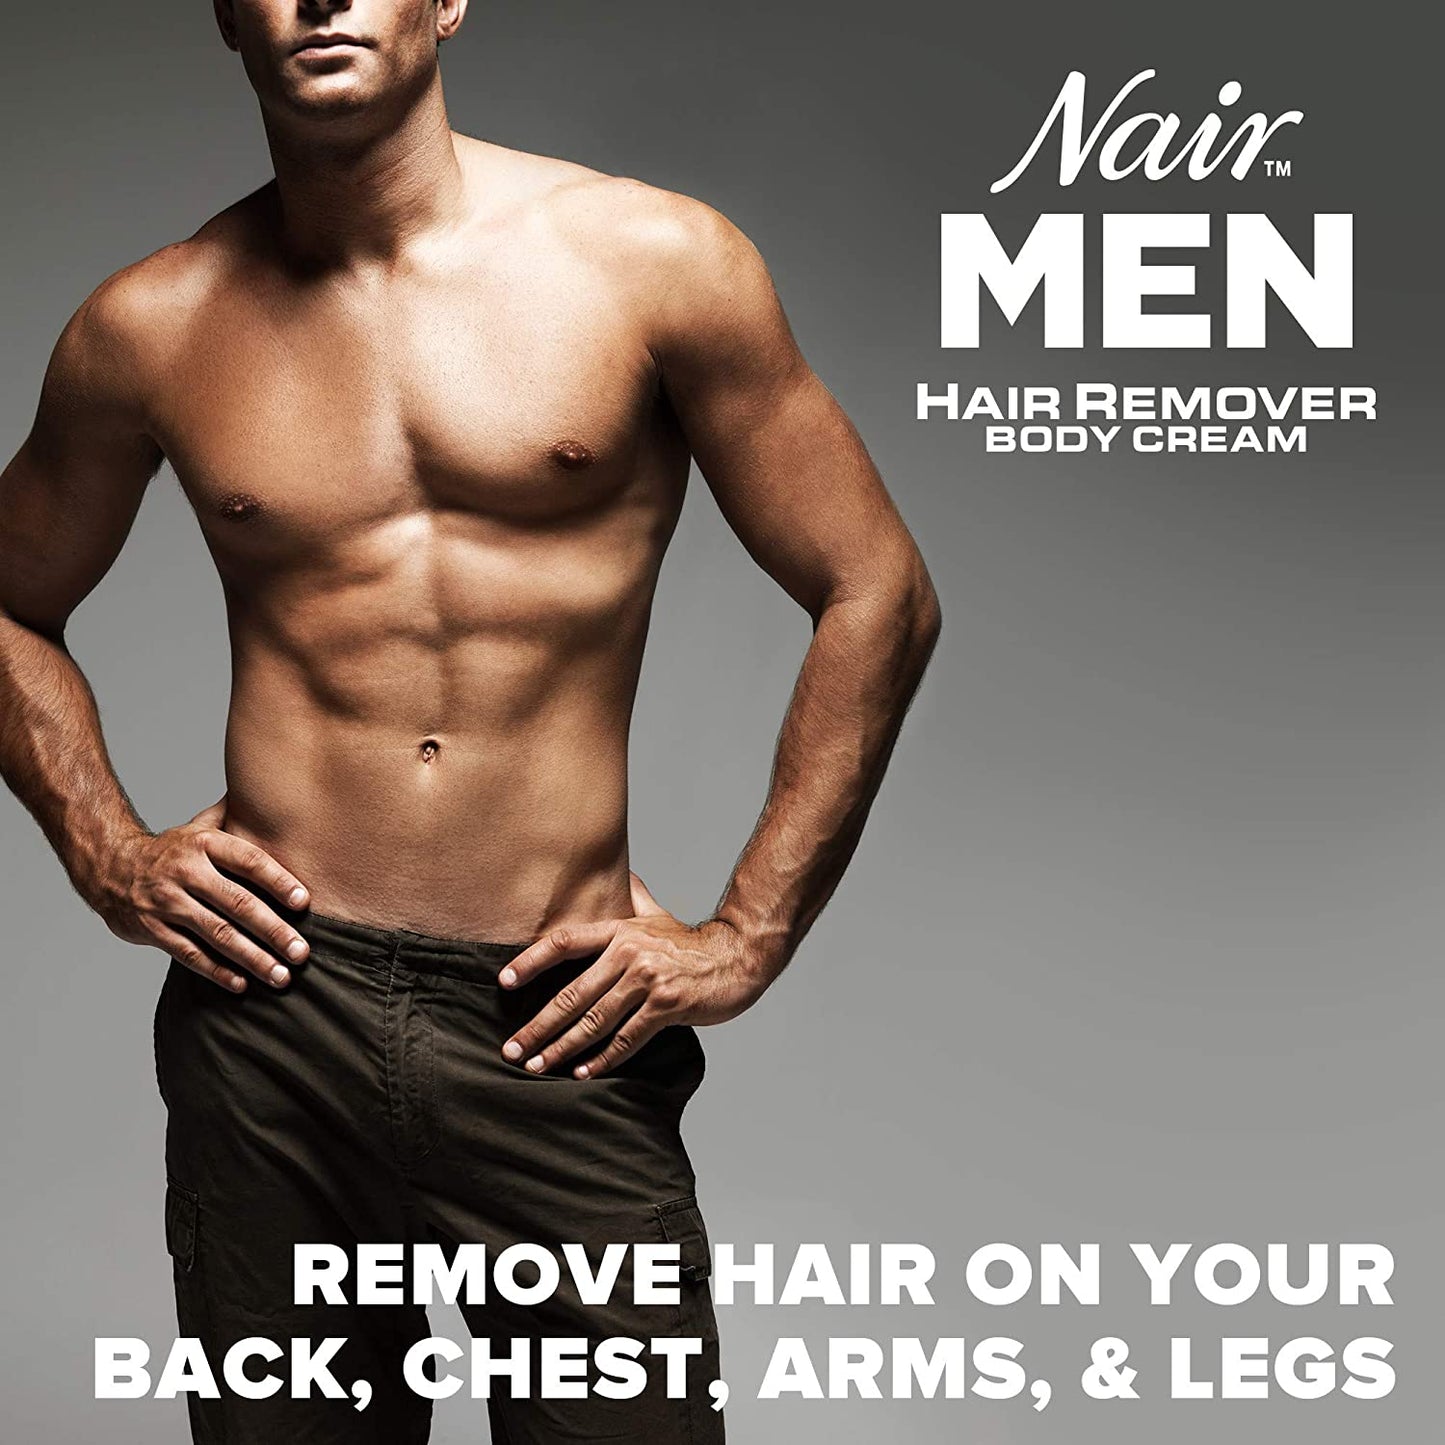 Nair Men Hair Remover Body Cream Quick & Easy Clean Looking Smooth Skin - 368g